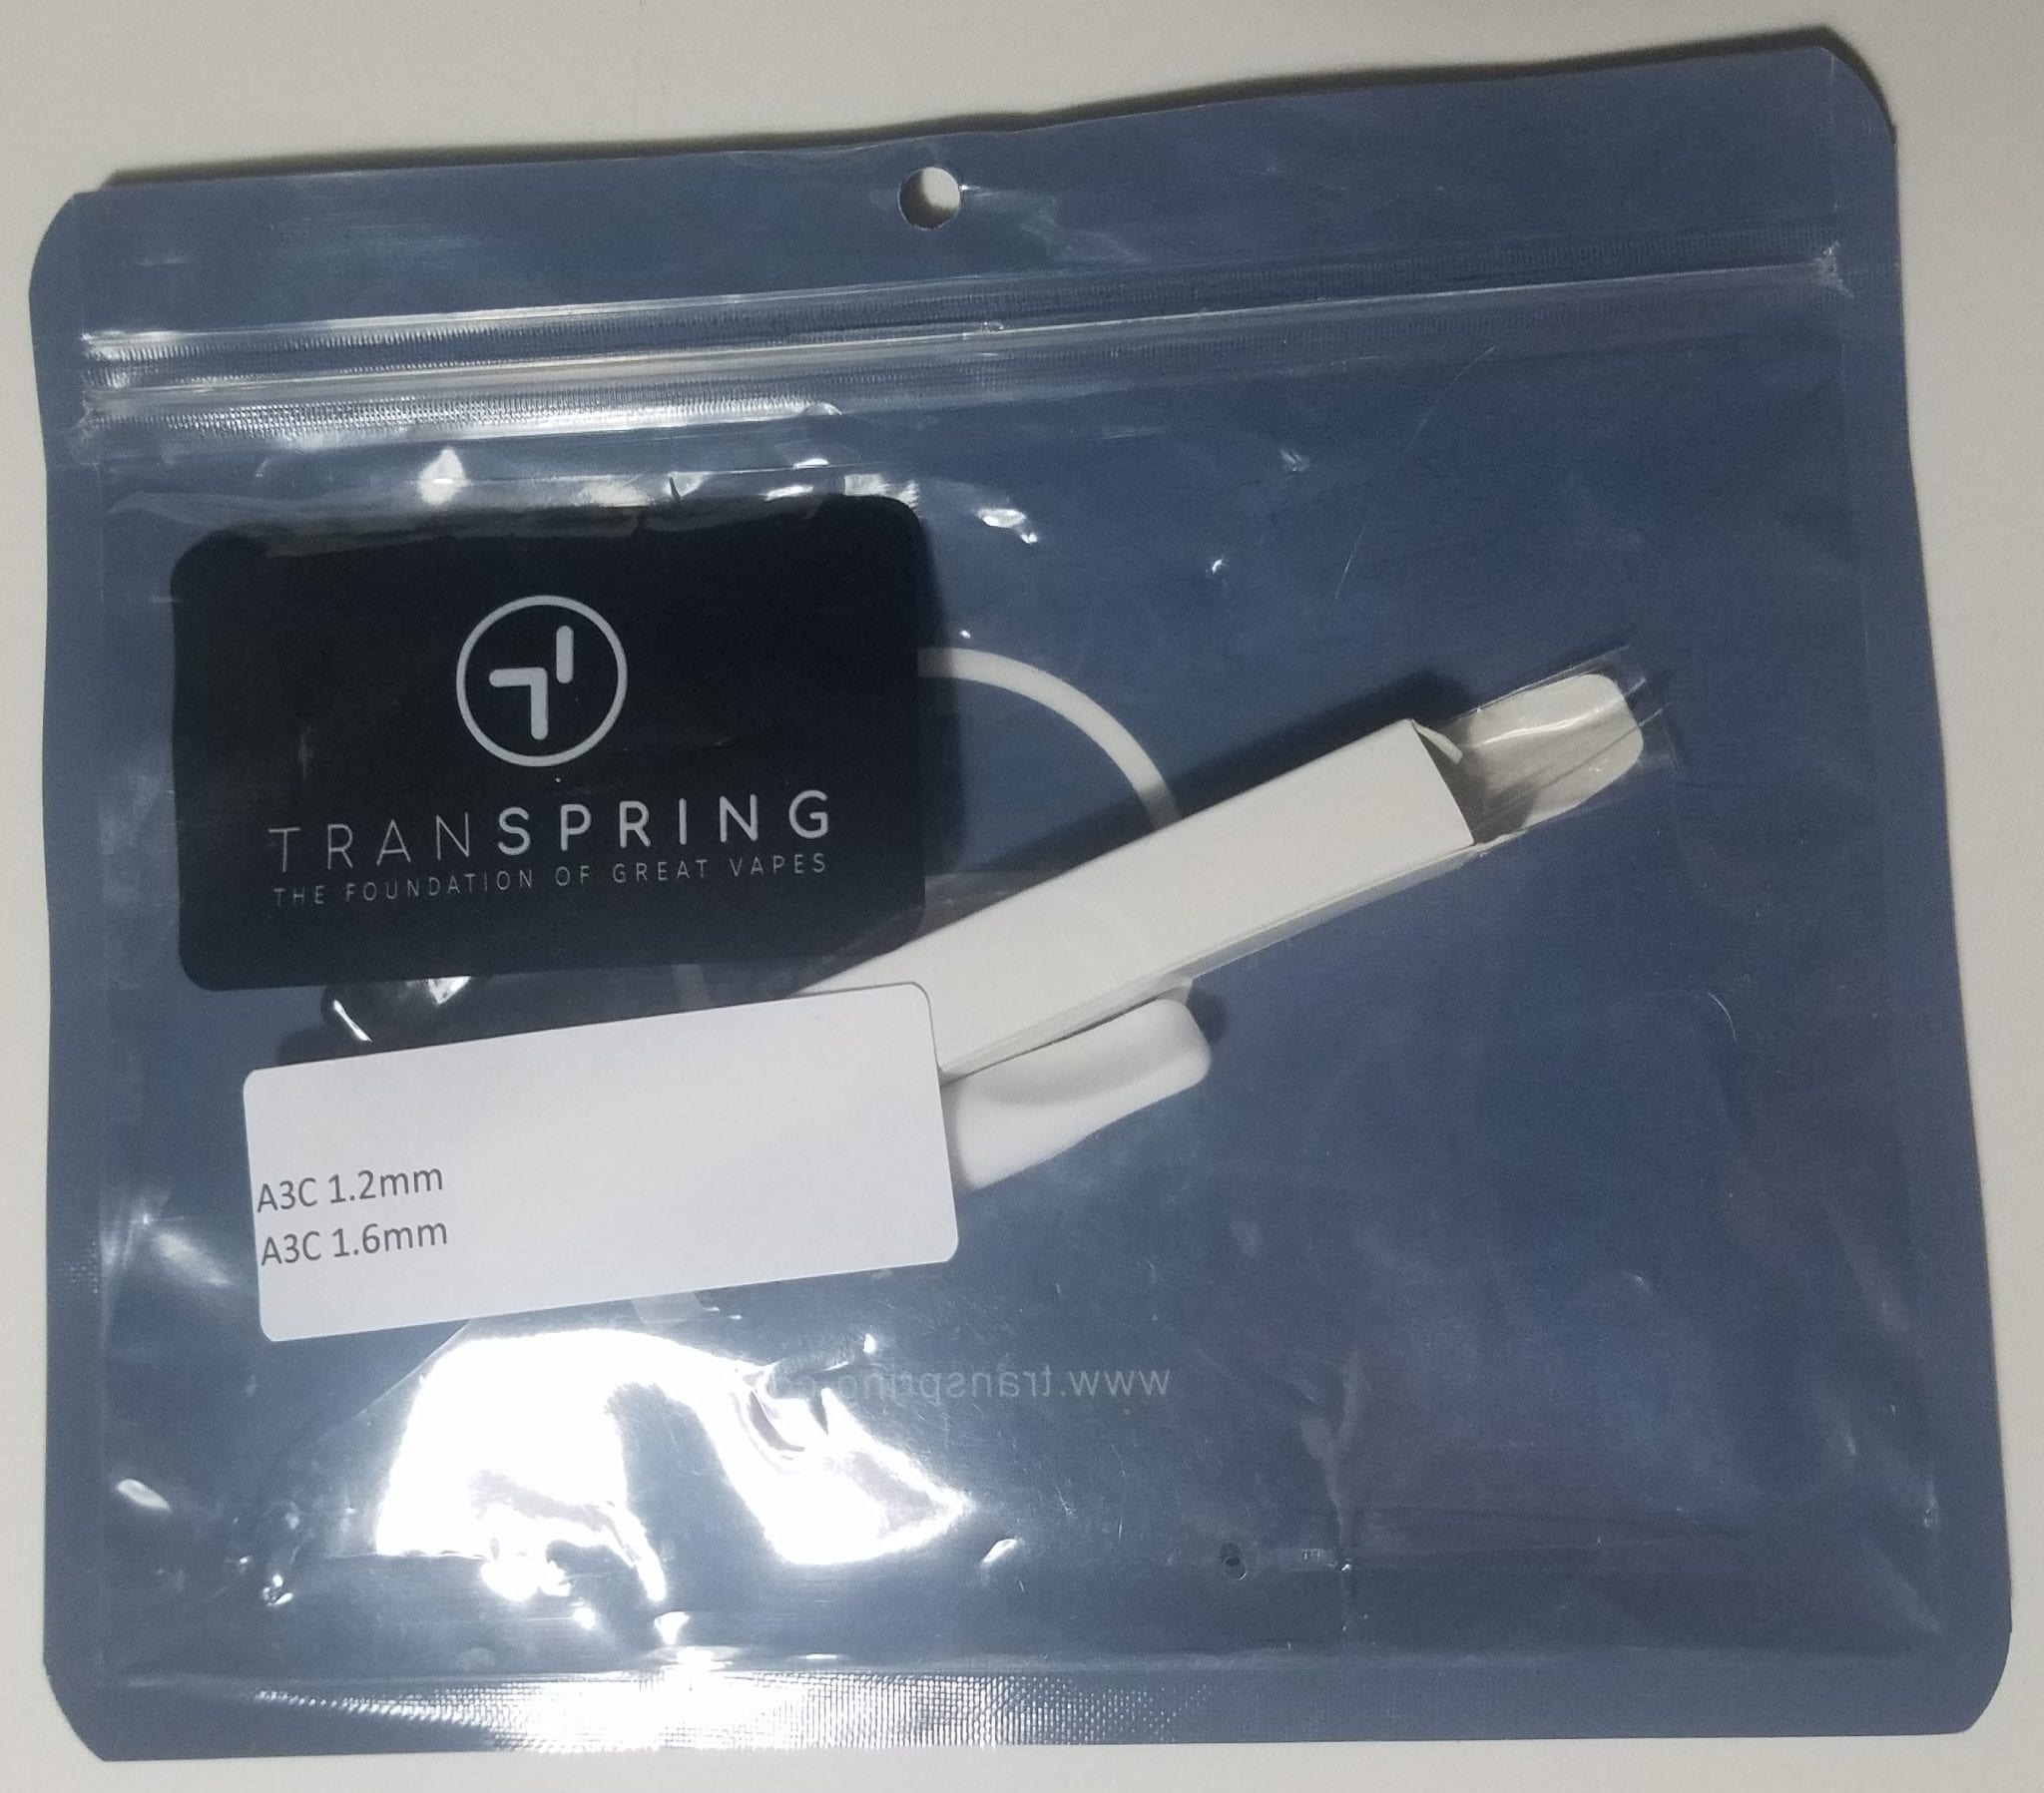 Transpring external package front